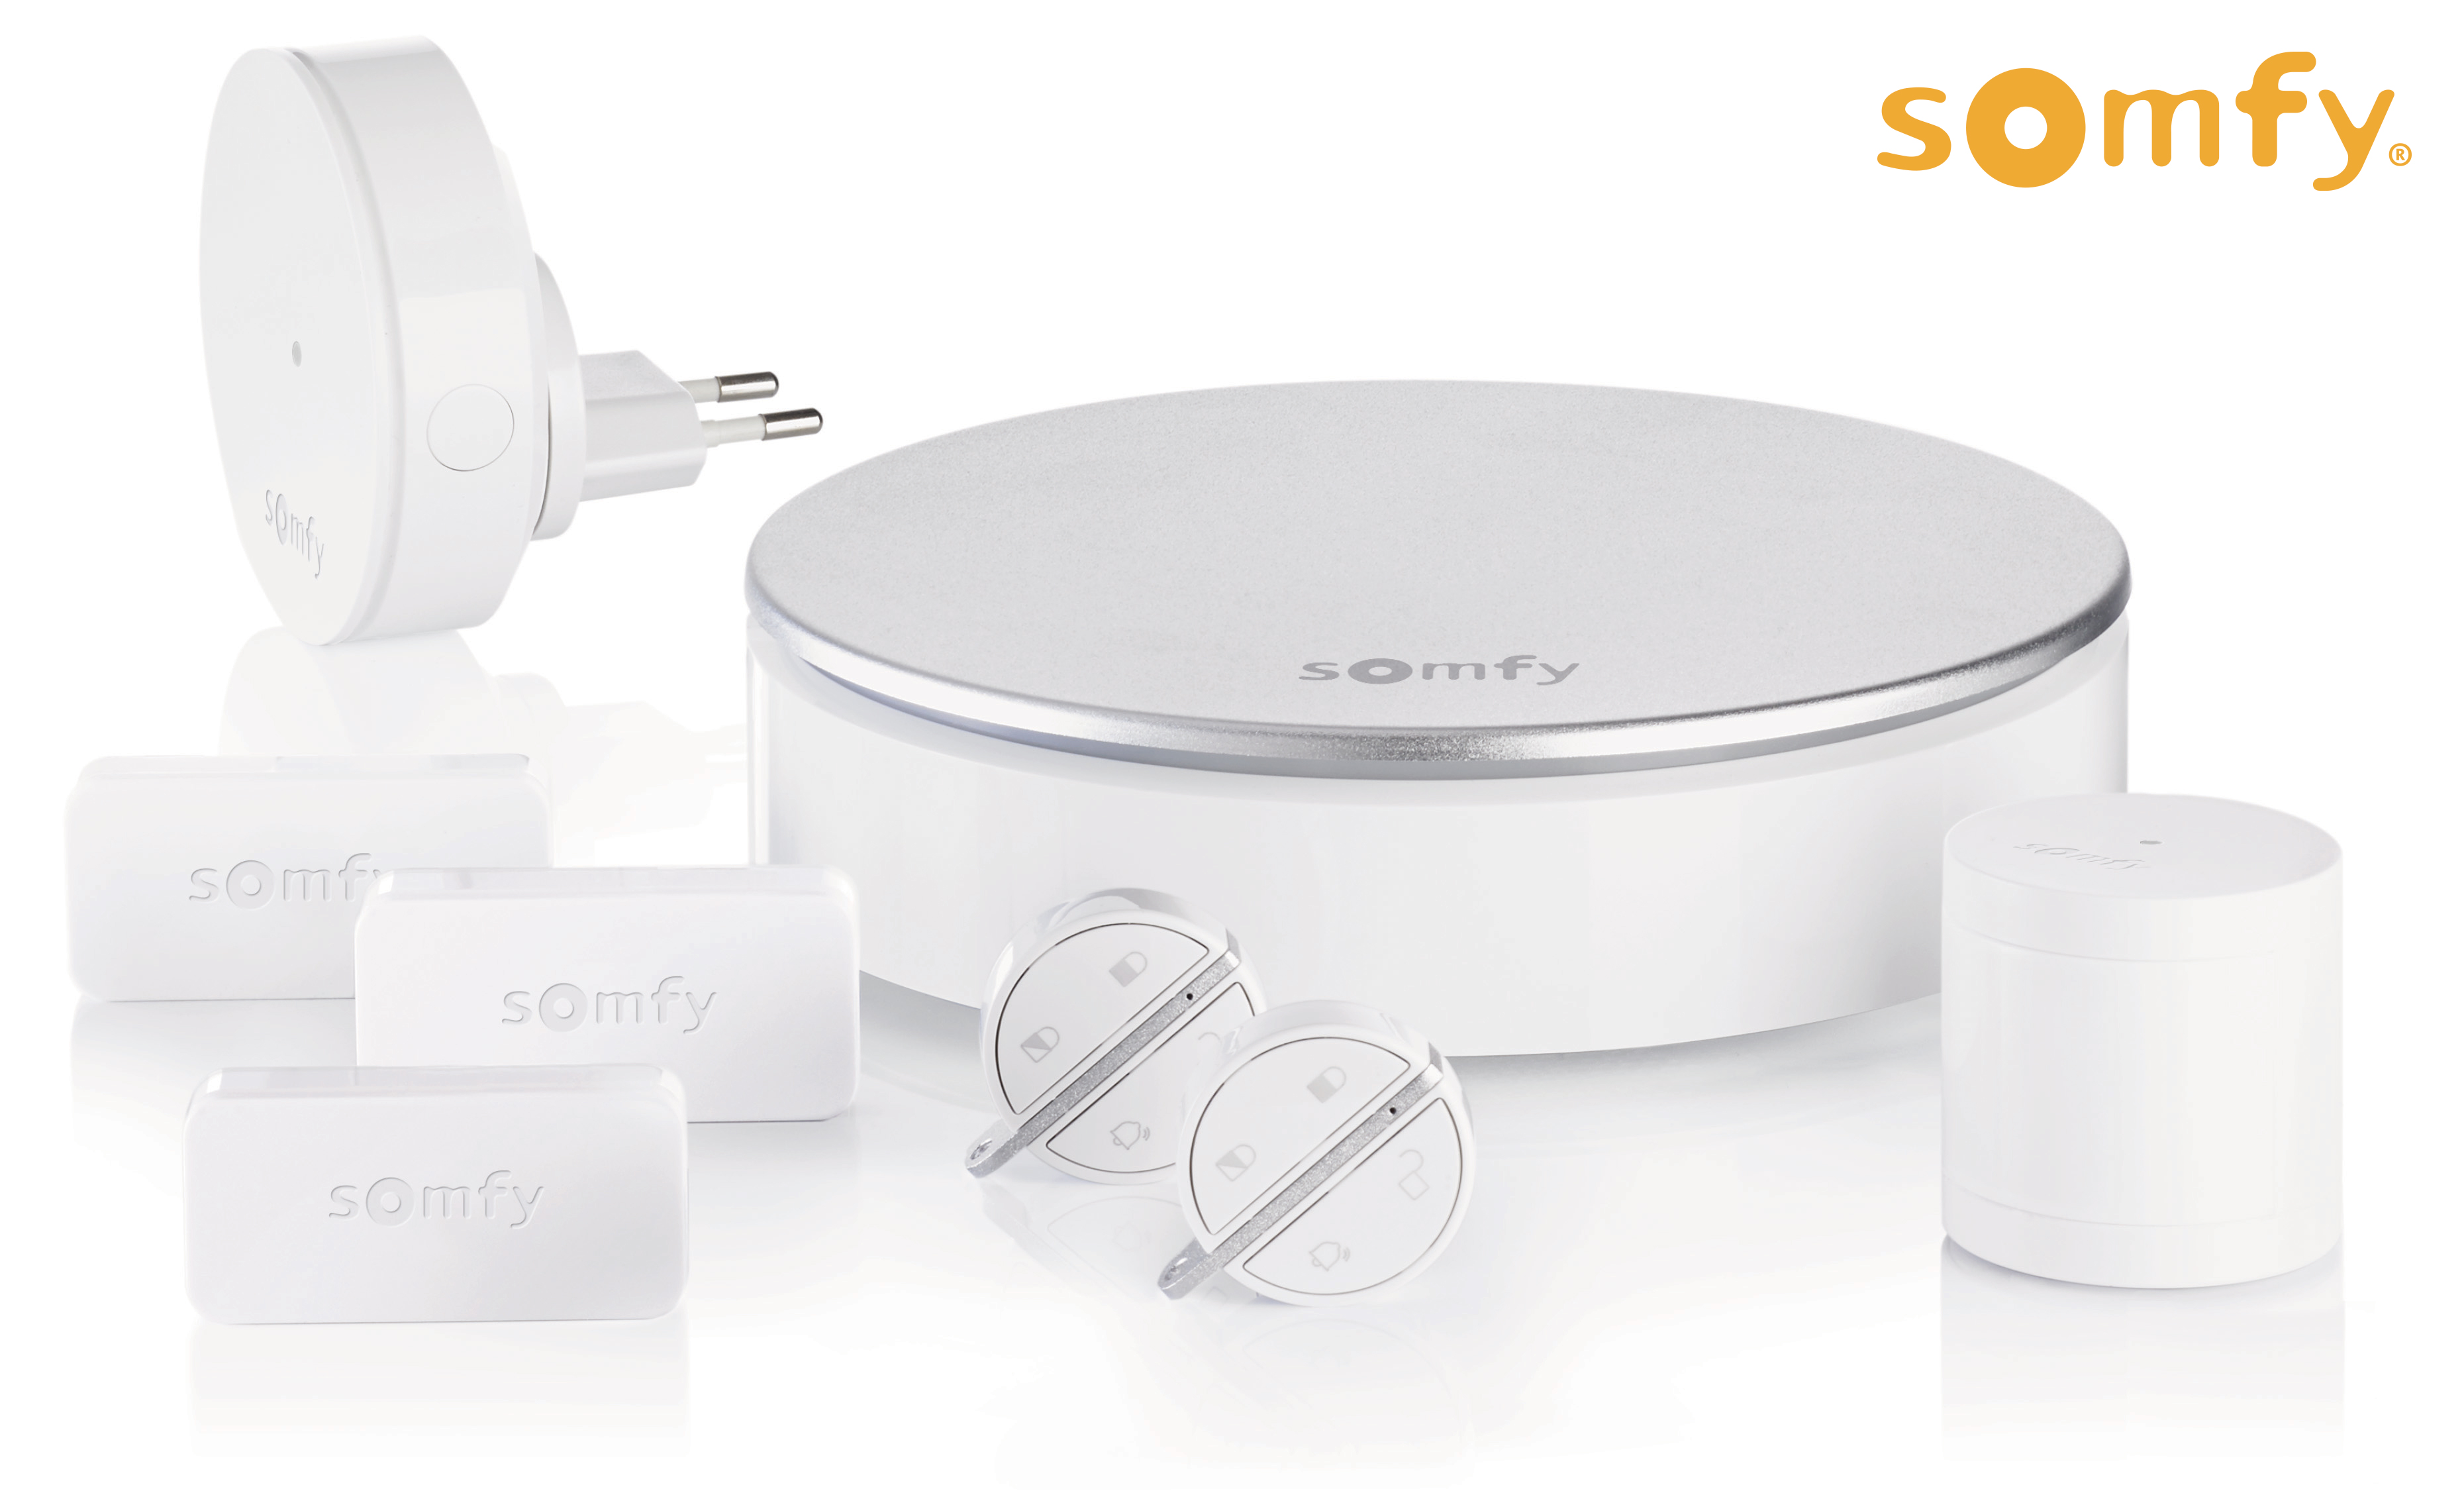 Somfy Protect home alarm